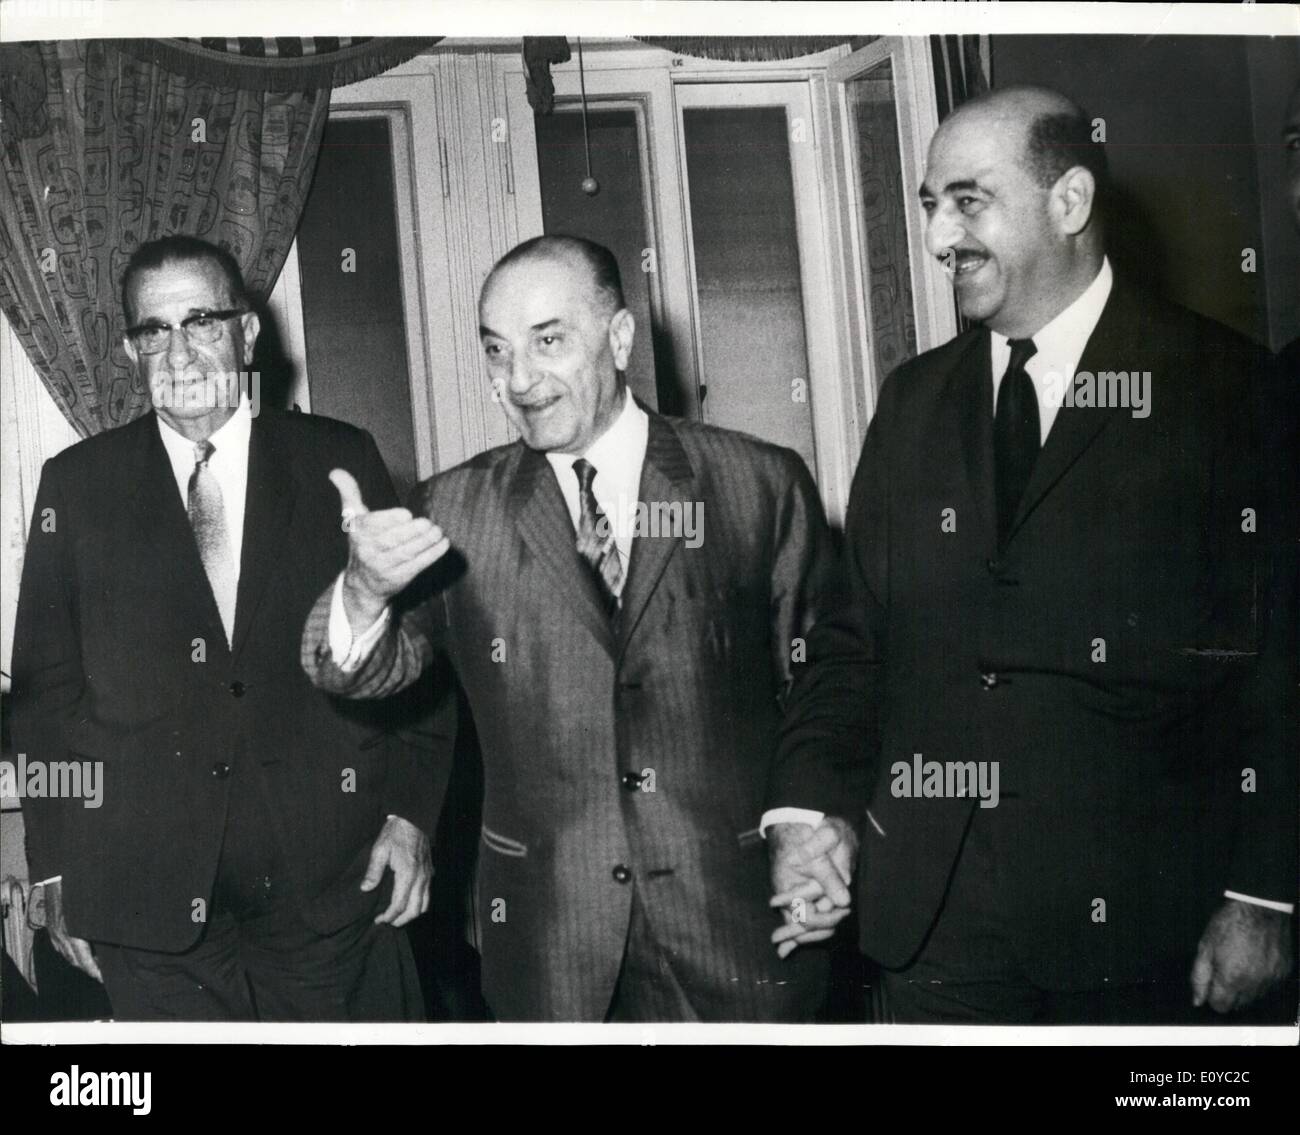 Aug. 08, 1969 - Tension In The Middle East.: There is considerable diplomatic activity in the Middle East countries owing to increasing incidents. Photo shows The Jordanian Prime Minister, Bahjat Talhouni, seen welcoming Dr. Hassan Sabri El-Kholi, (right), the personal envoy of President Naeces, and the Lebanese Foreign Minister, Yousef Salem (left). Dr. Kholi had previously delivered to King Hussein a message from President Nasser. Stock Photo